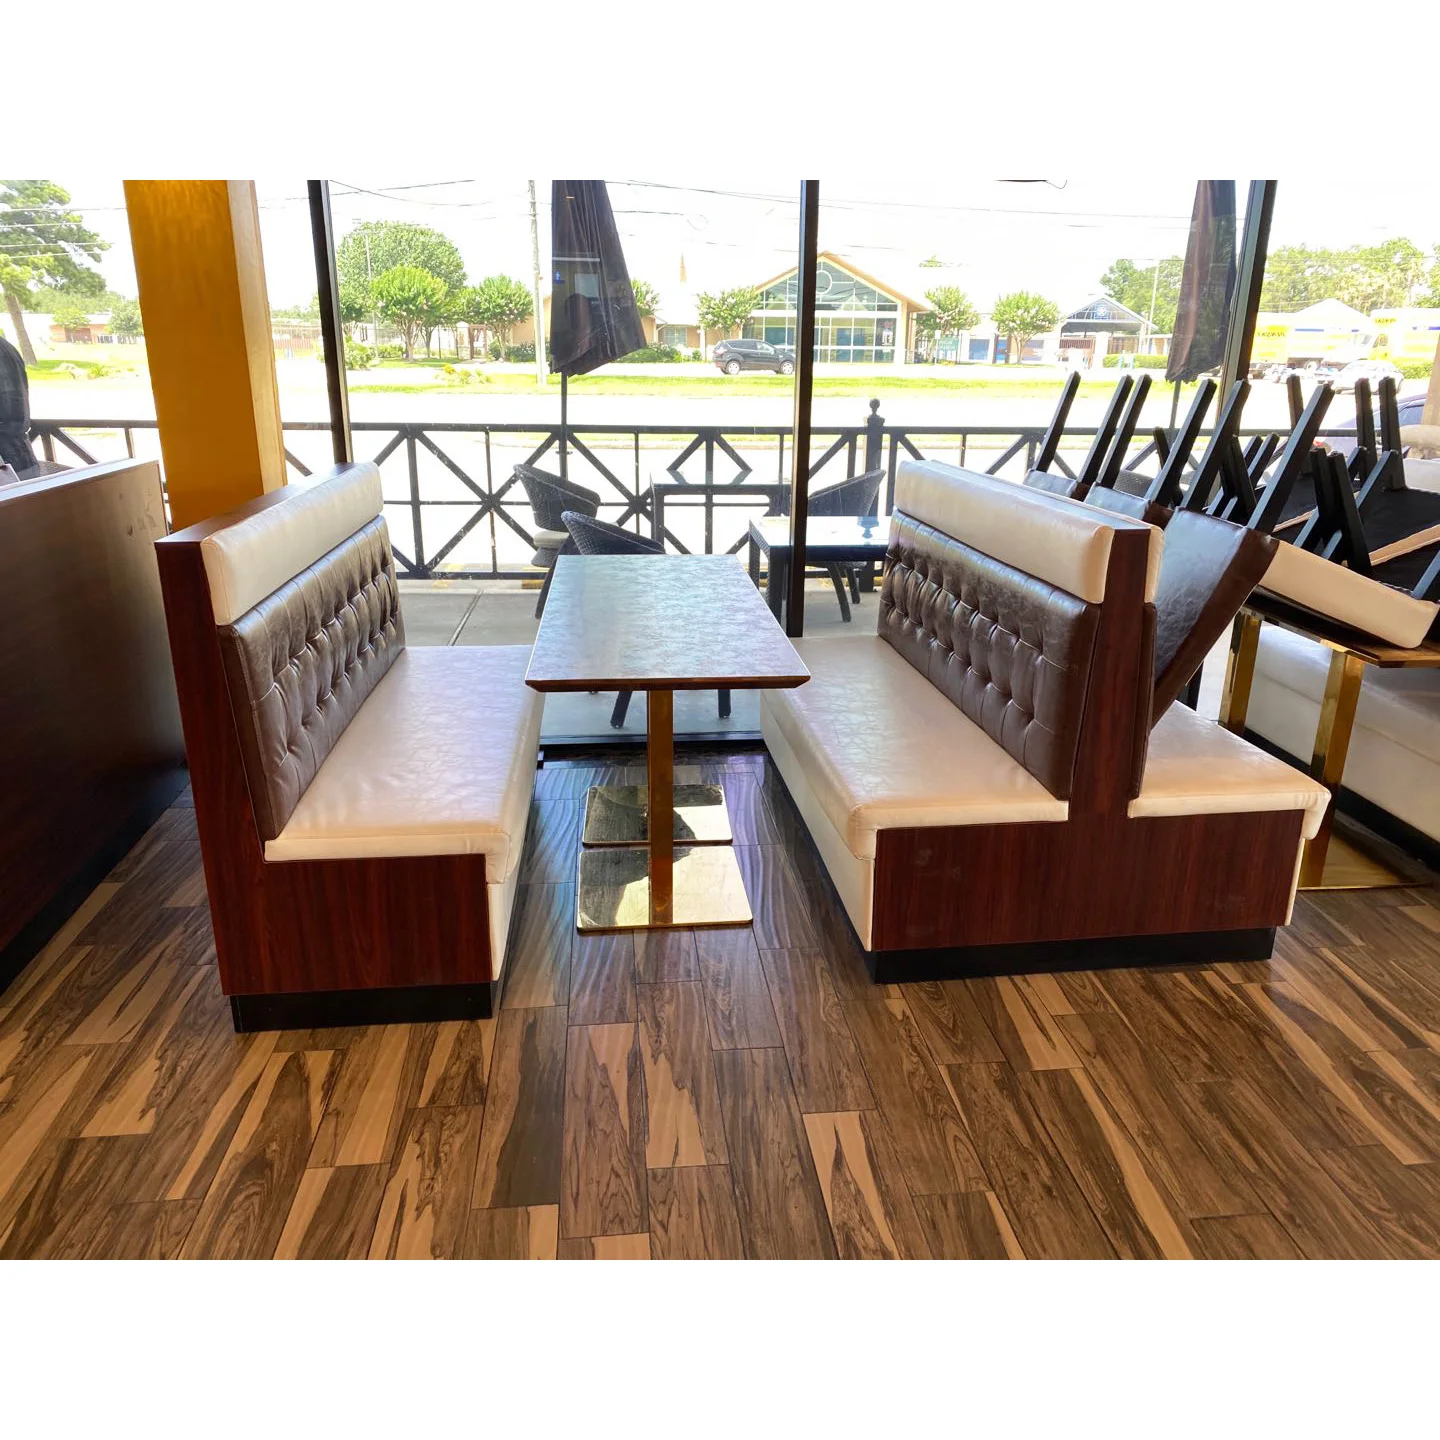 
Pattern color fast food restaurant double side seat booth seating sofa and wood table for sale(FOH CBCK20)  (62159424262)